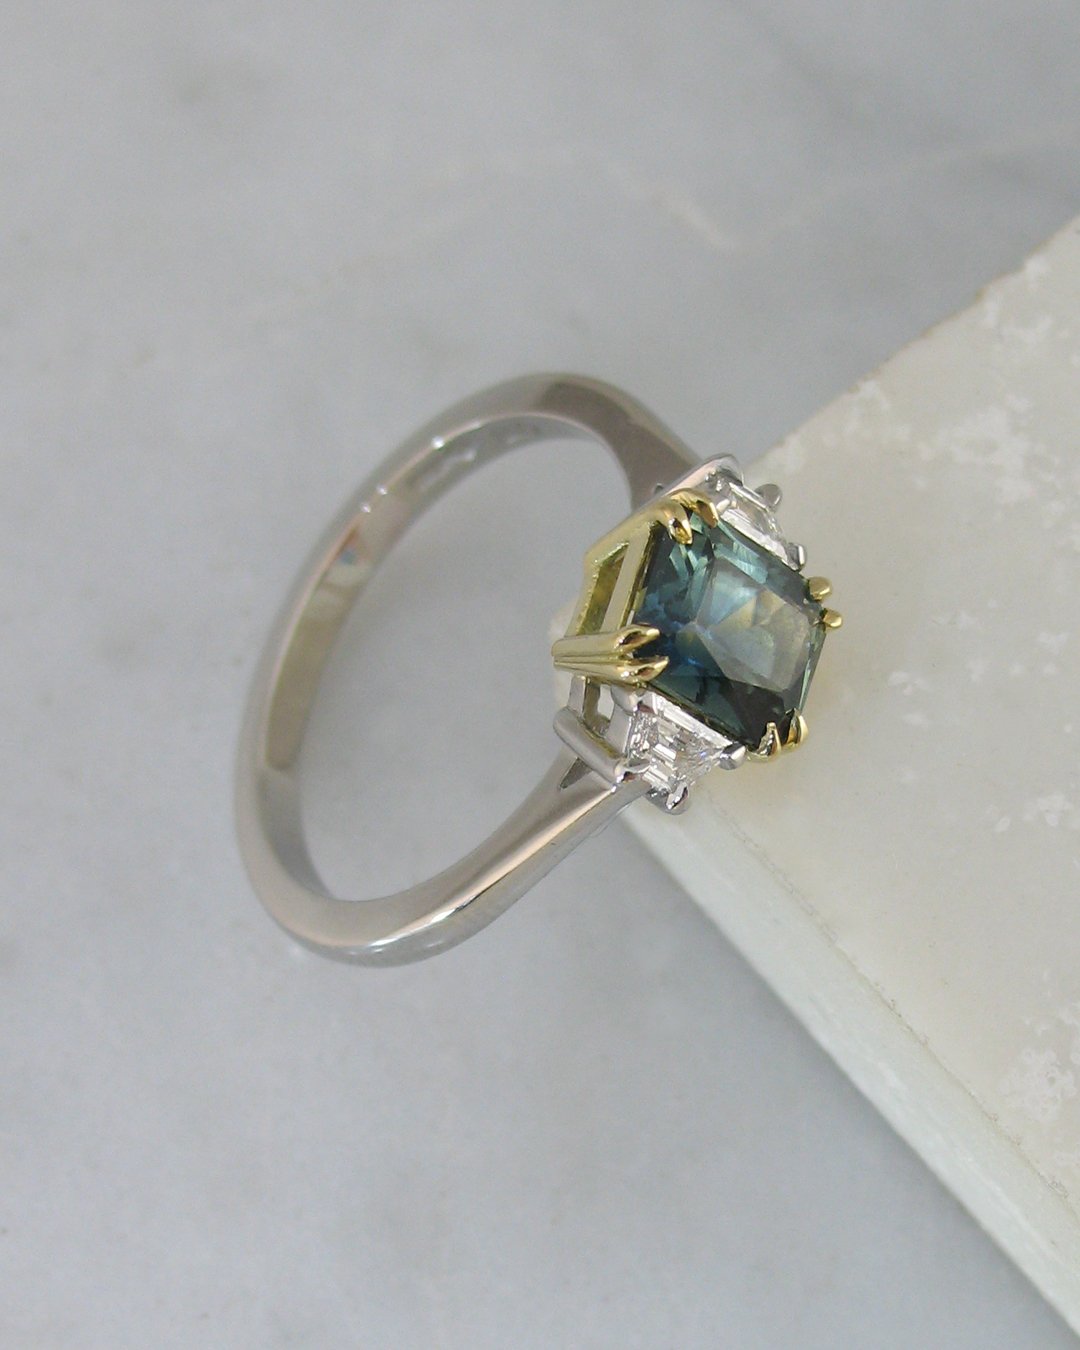 A beautiful teal sapphire engagement ring